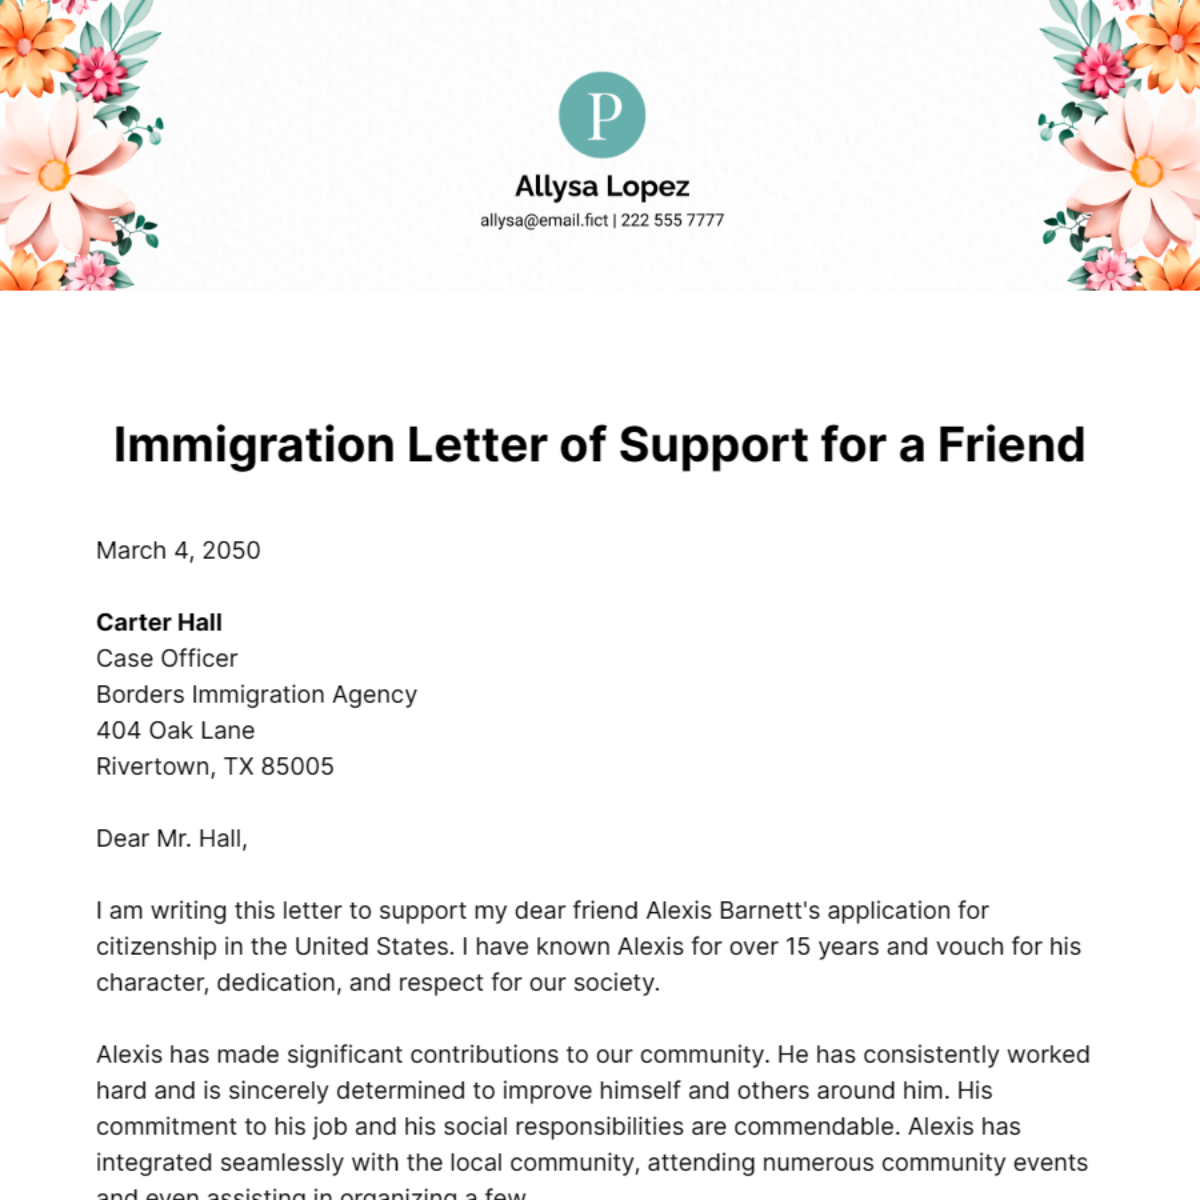 Immigration Letter of Support for a Friend Template